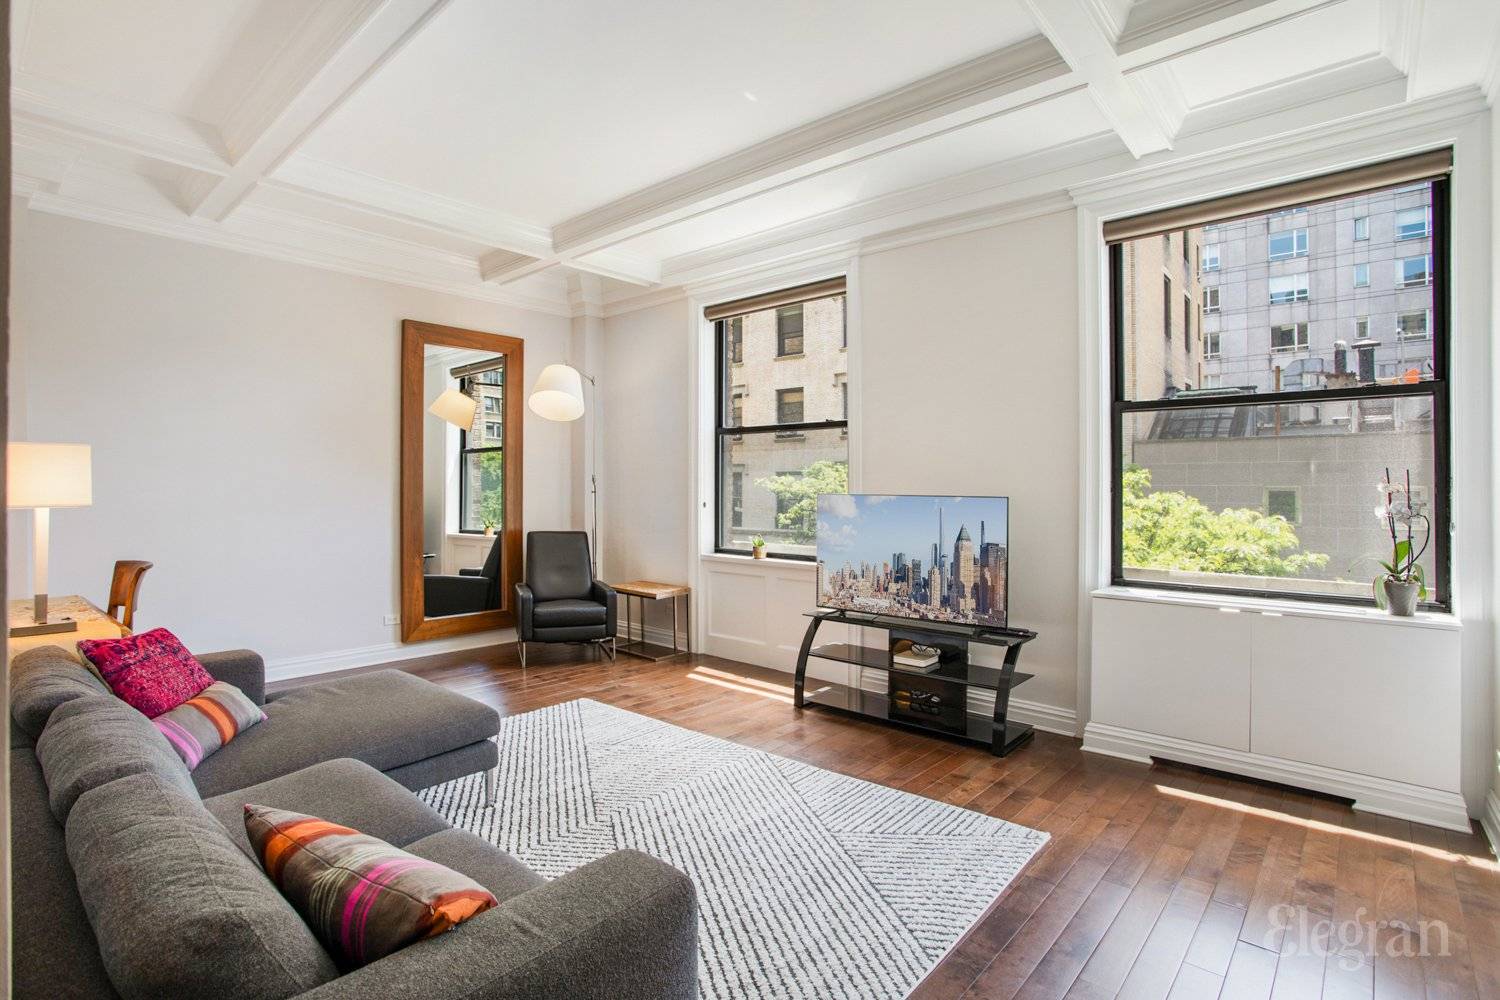 Step into luxury with this inviting 2 bedroom, 1 bath unit boasting sun drenched living spaces flooded with natural light from south facing windows.